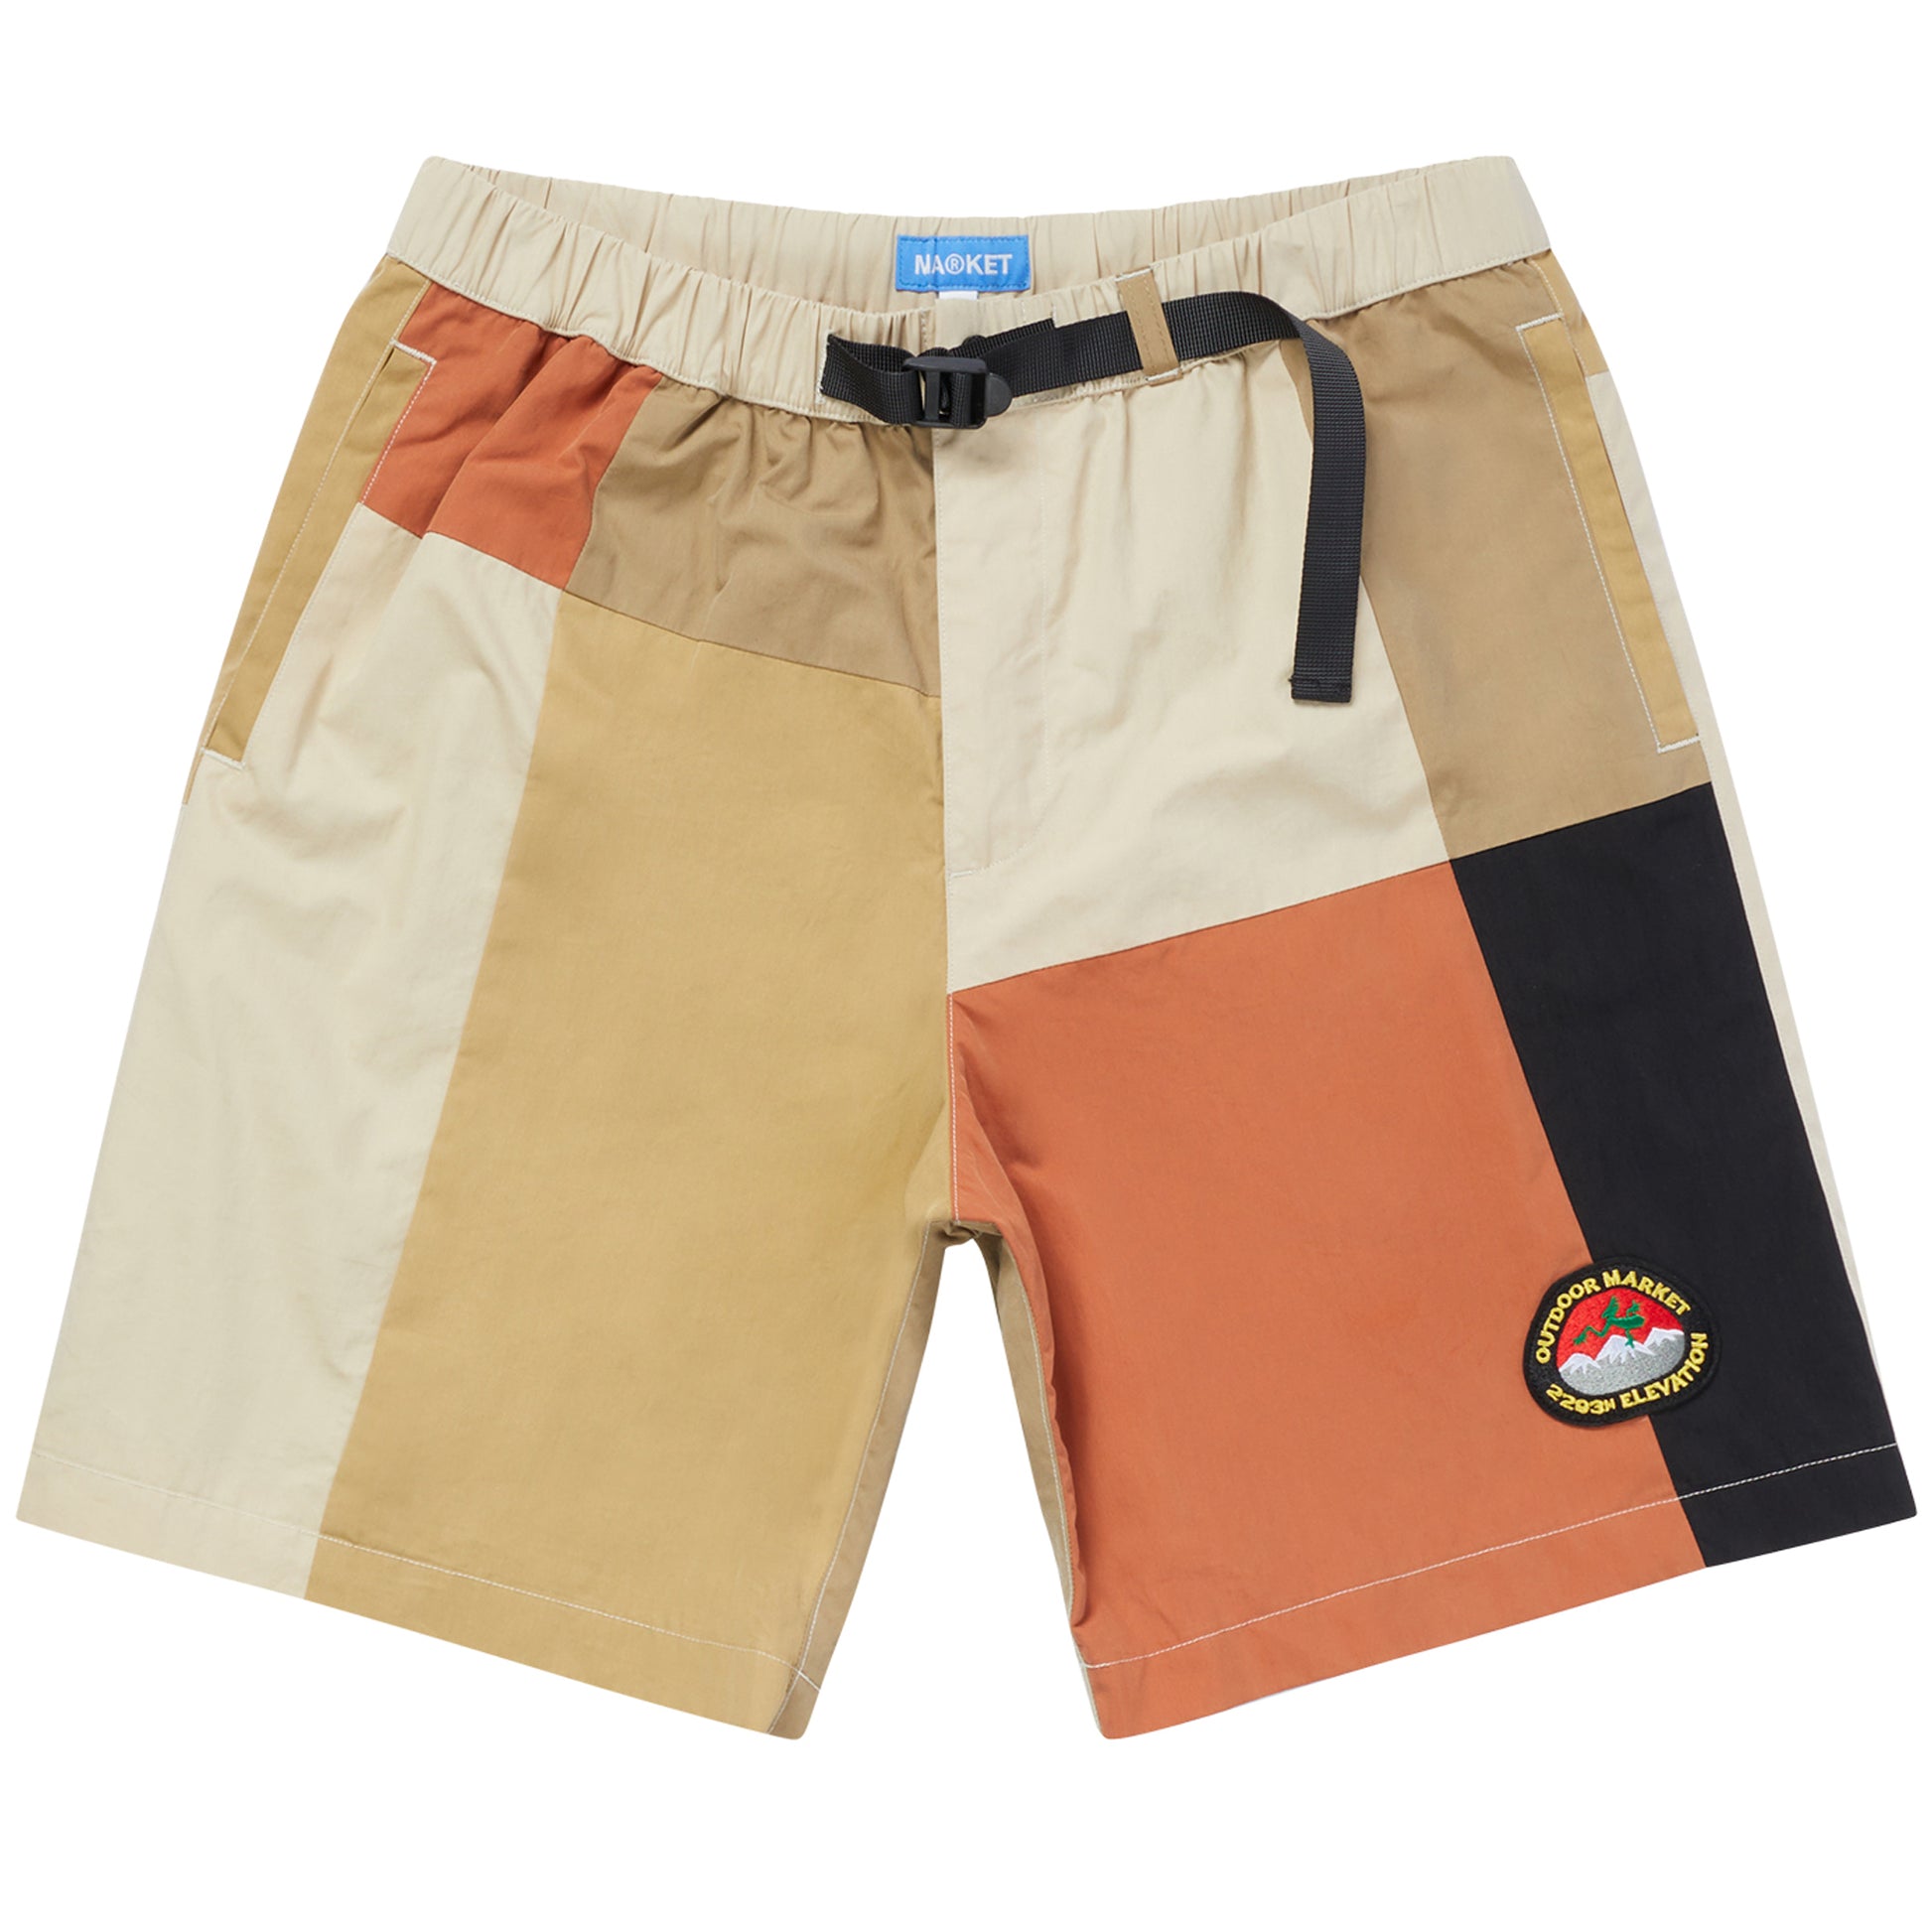 Paneled Nylon Shorts With Mesh Inner Lining With Embroidered Patch